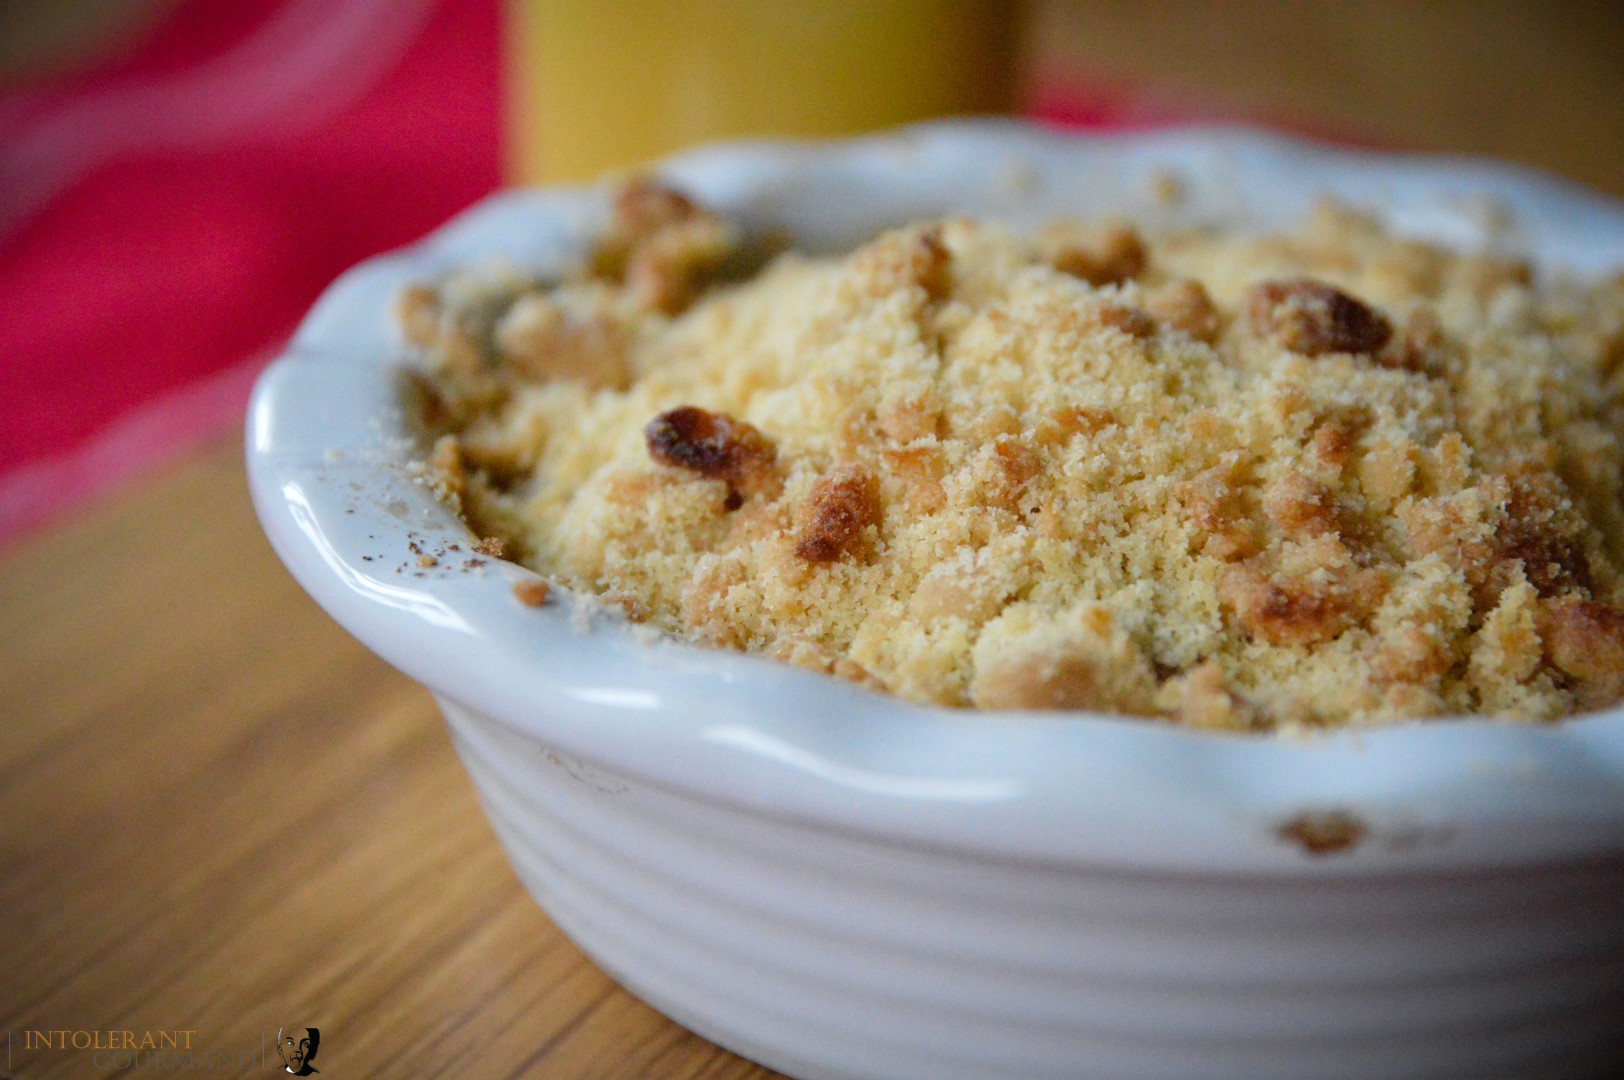 The best ever Gluten free & Dairy free Apple Crumble created for the Speciality Fine Food Fair! A delicious partnership of apple with a hint of mixed spice, covered with a shortbread inspired crumble topping! The perfect comfort food, especially when paired with dairy-free custard or cream! www.intolerantgourmand.com